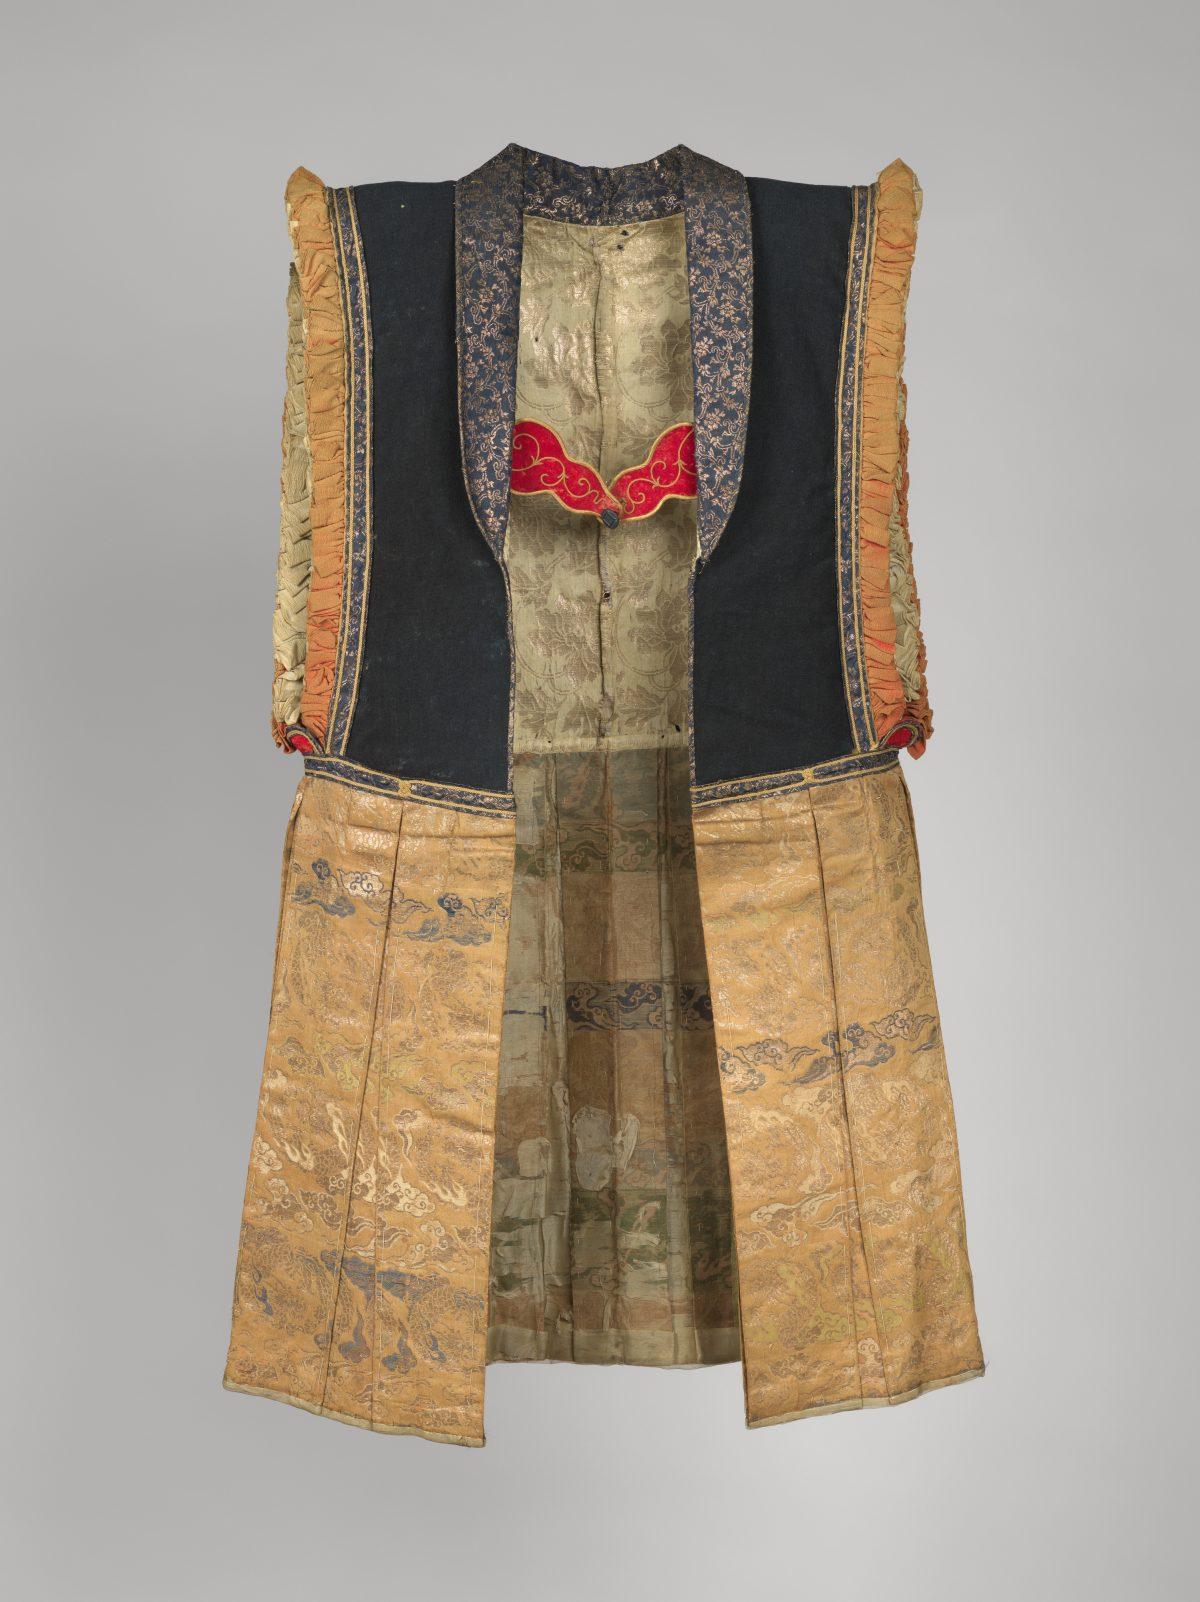 The front of a surcoat (jinbaori), Momoyama period (1573–1615), late 16th century. Battle surcoats were produced from the Age of Civil War (circa 1467–1603) through the end of the Edo period (1615–1867). Mary Livingston Griggs and Mary Griggs Burke Foundation Fund, 2017. (The Metropolitan Museum of Art)